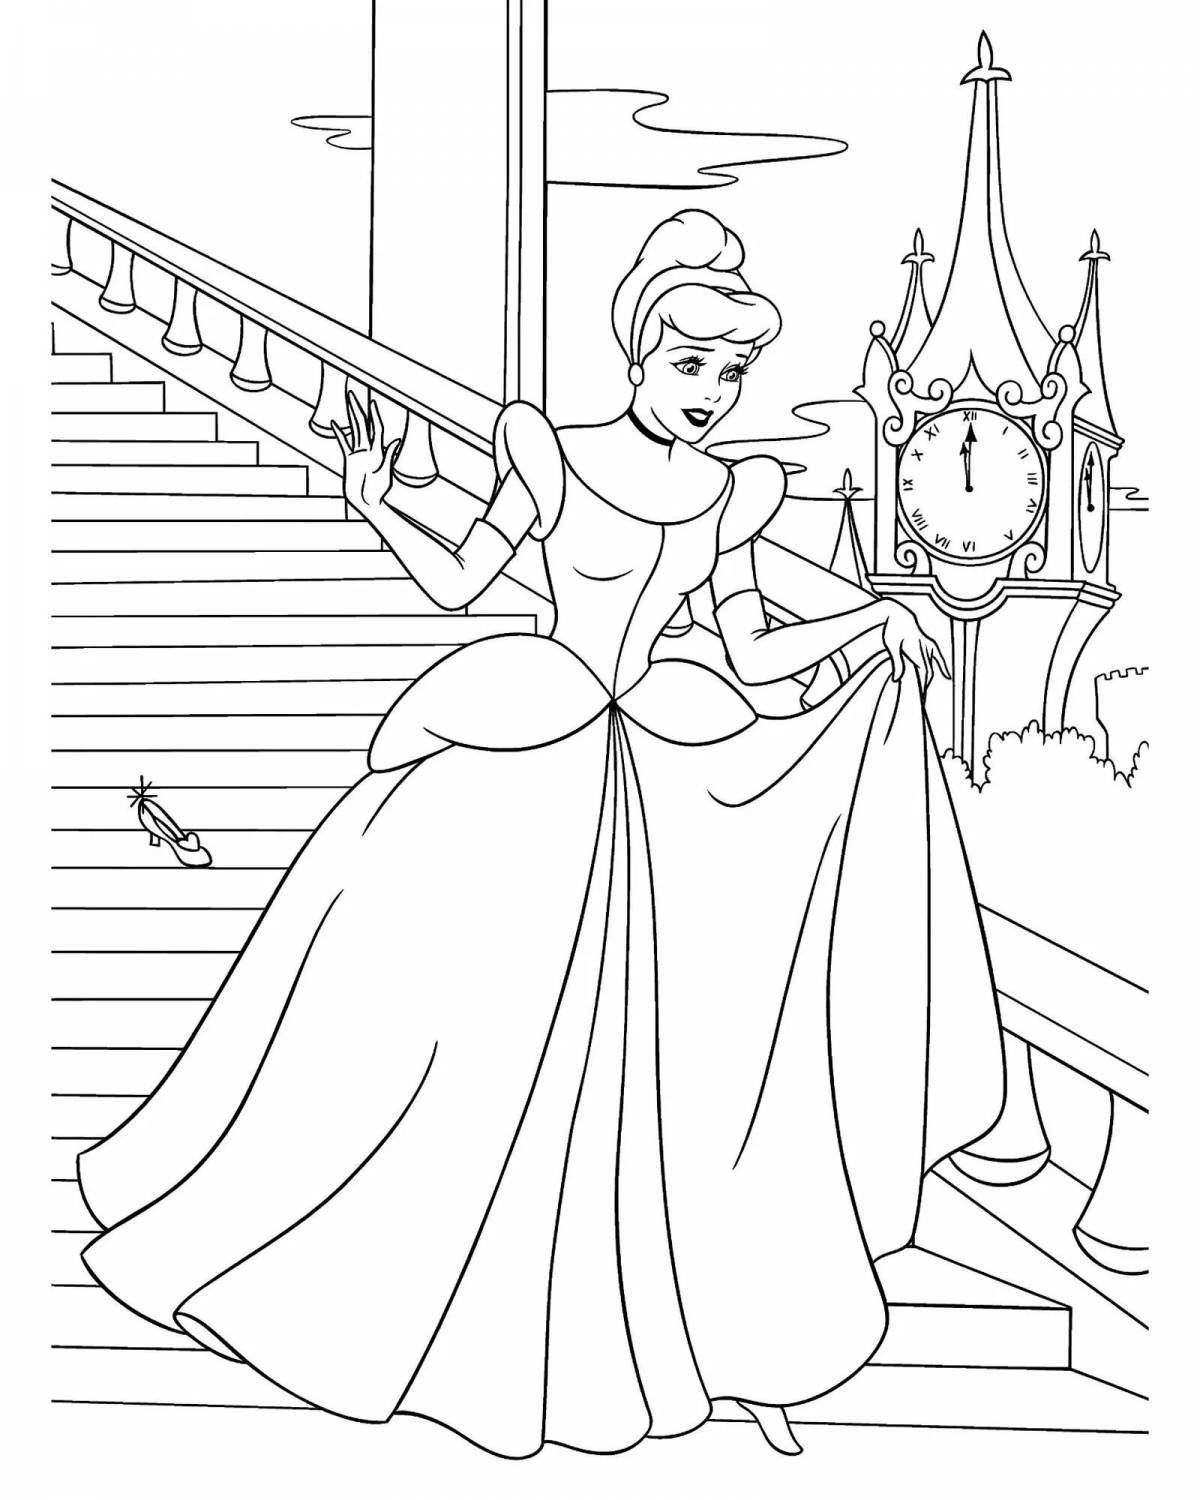 Magic coloring Cinderella for children 4-5 years old